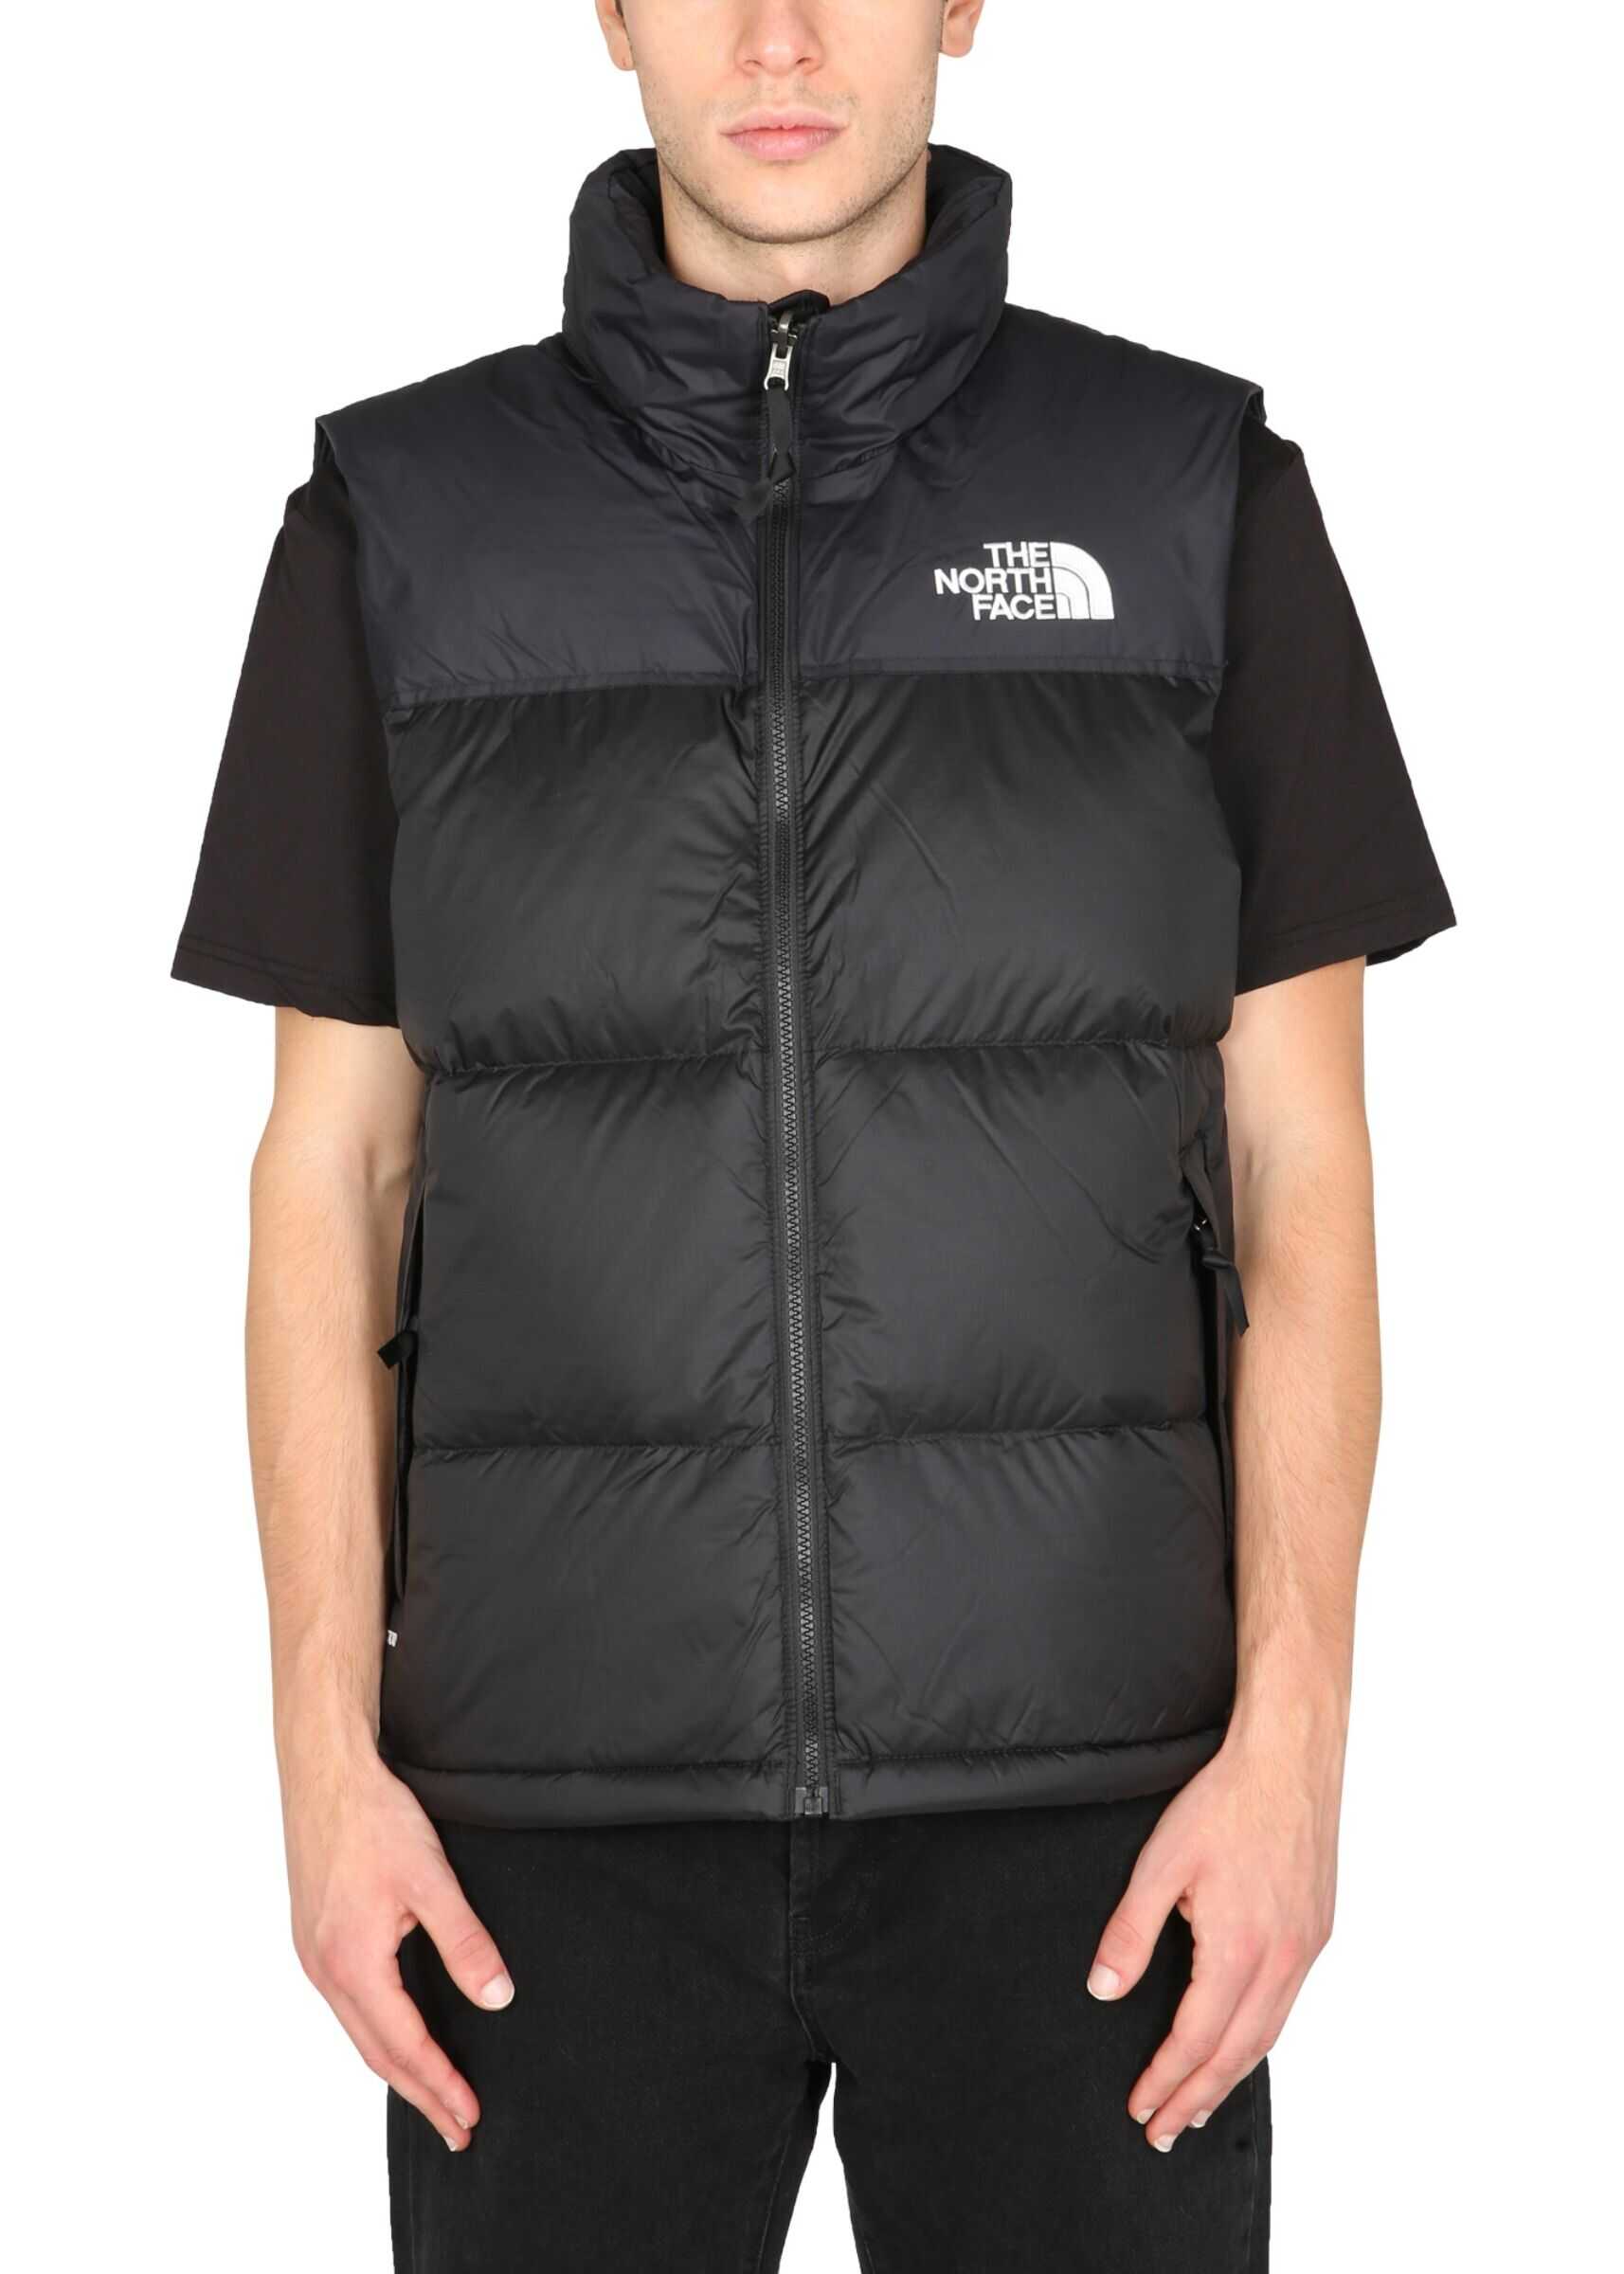 The North Face Vest With Logo NF0A3JQQ_LE41 BLACK